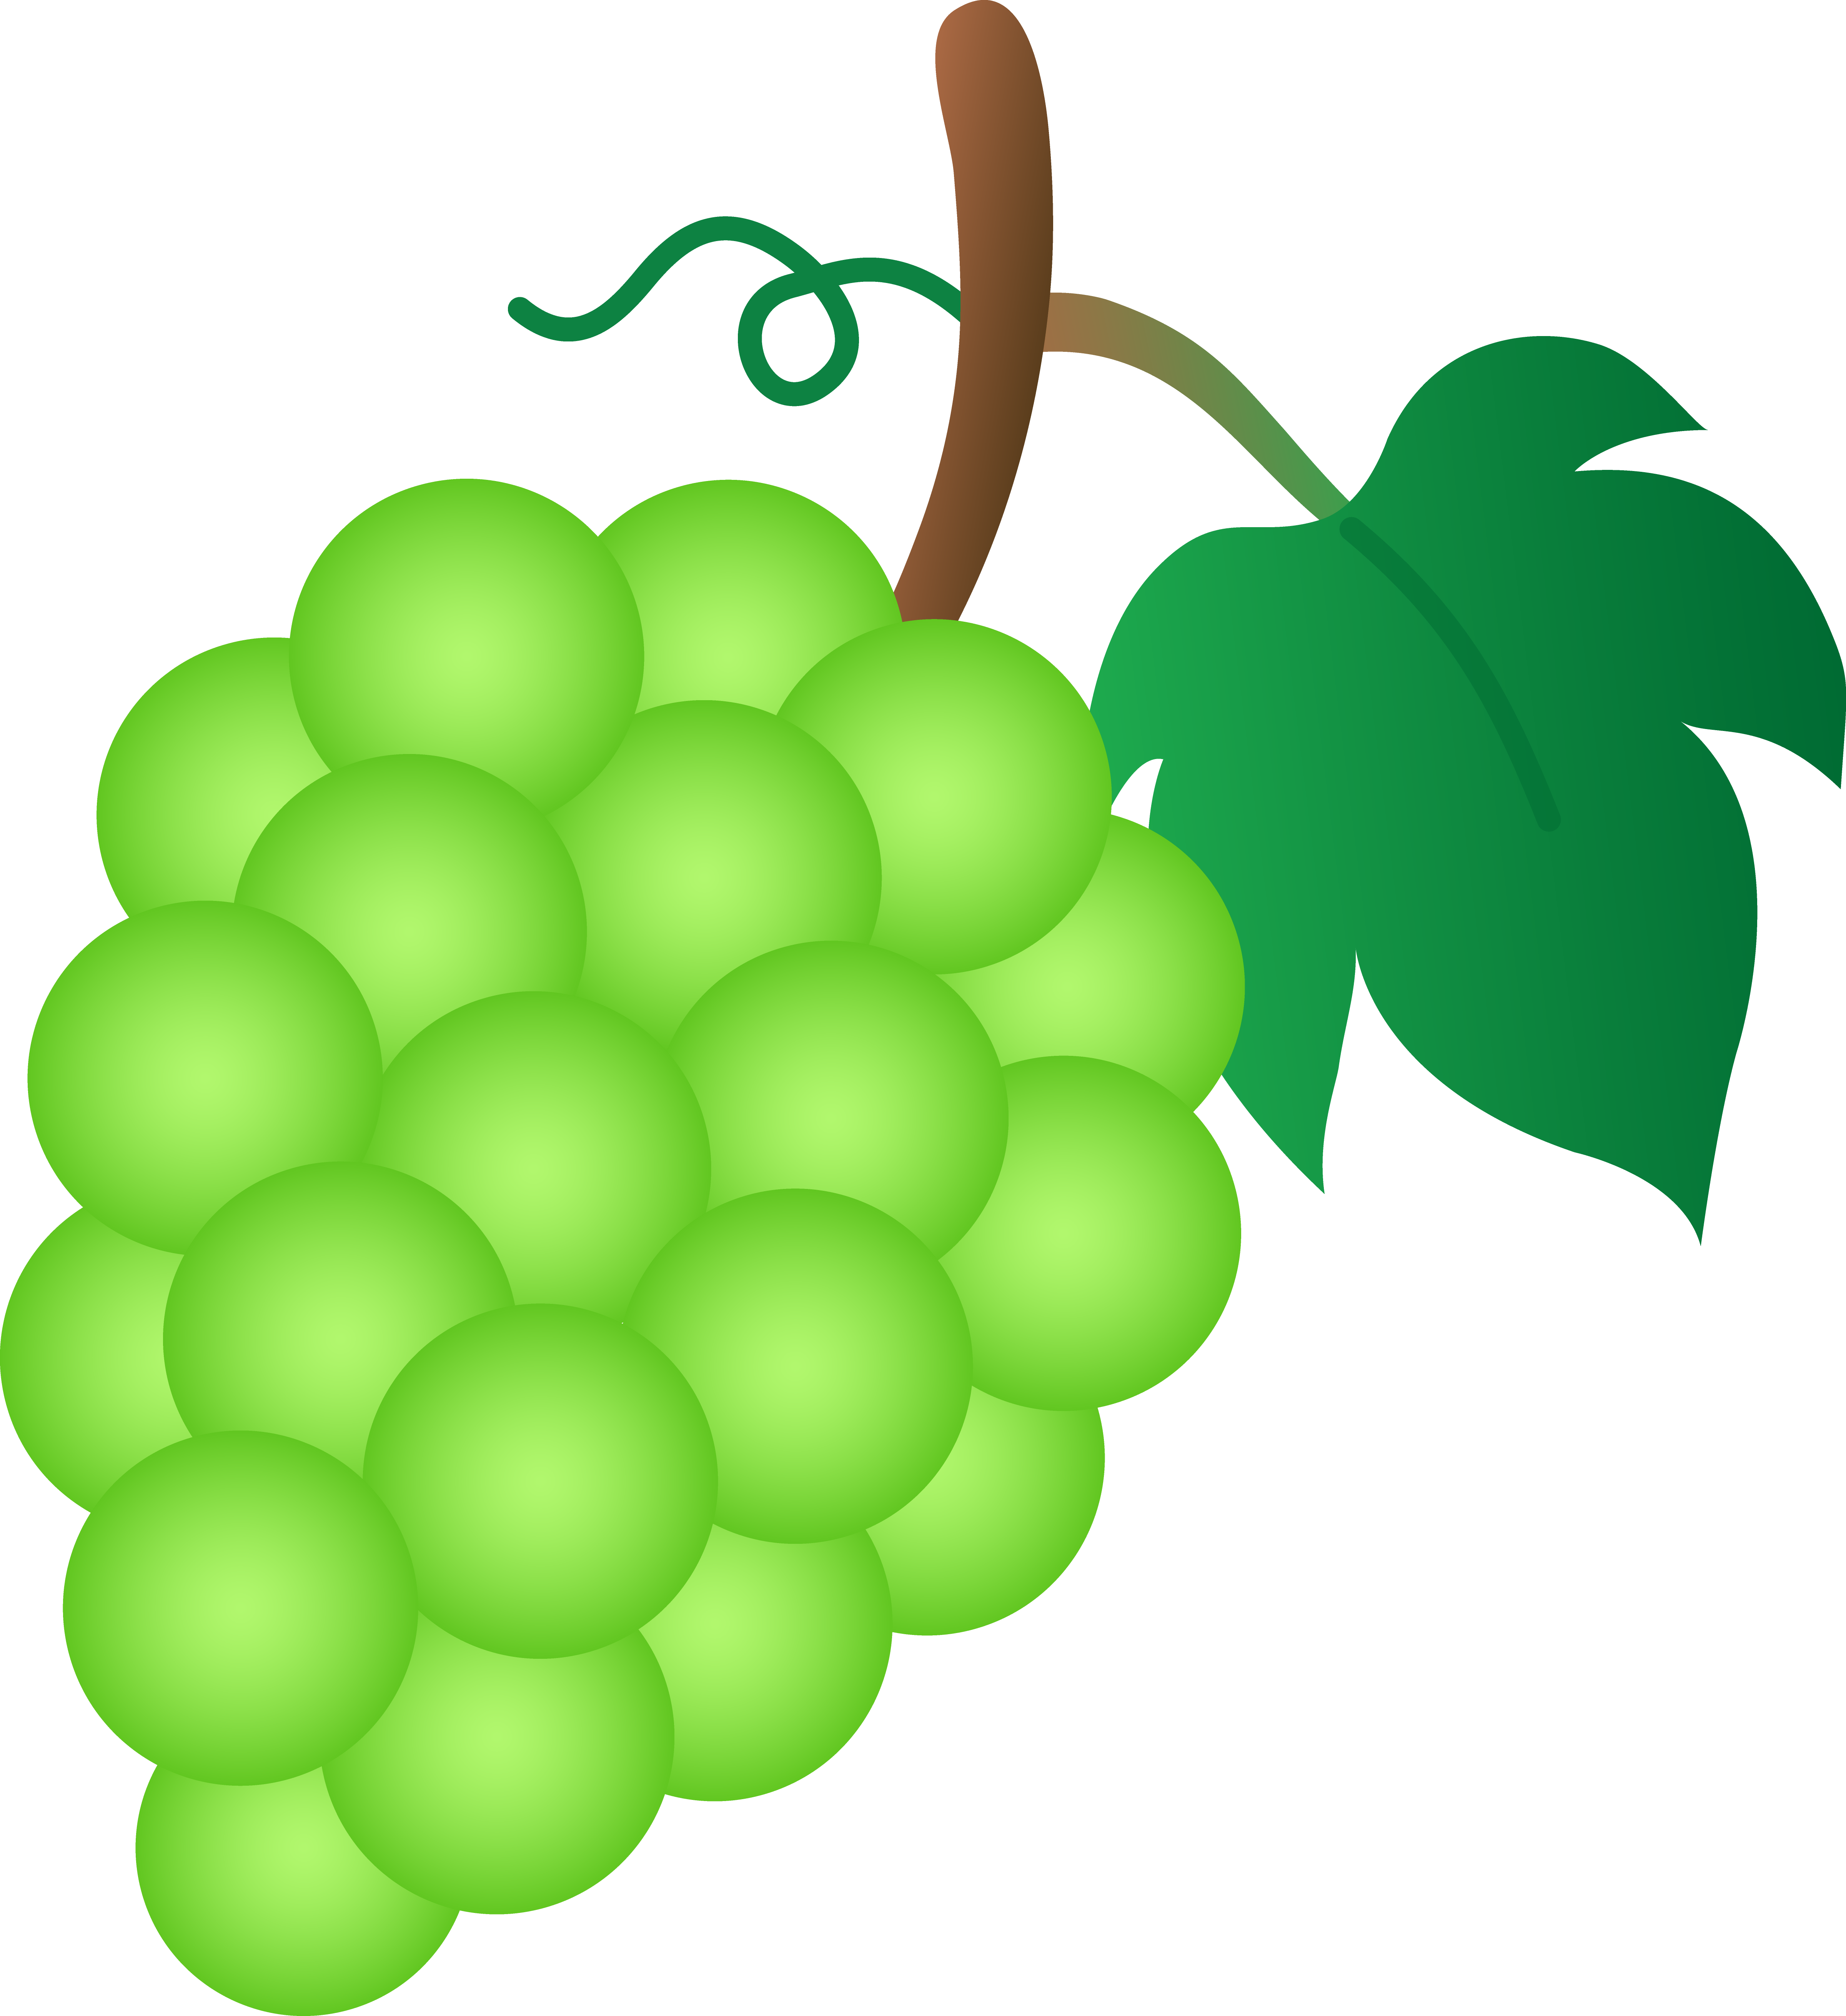 Bunch of Green Grapes - Free Clip Art